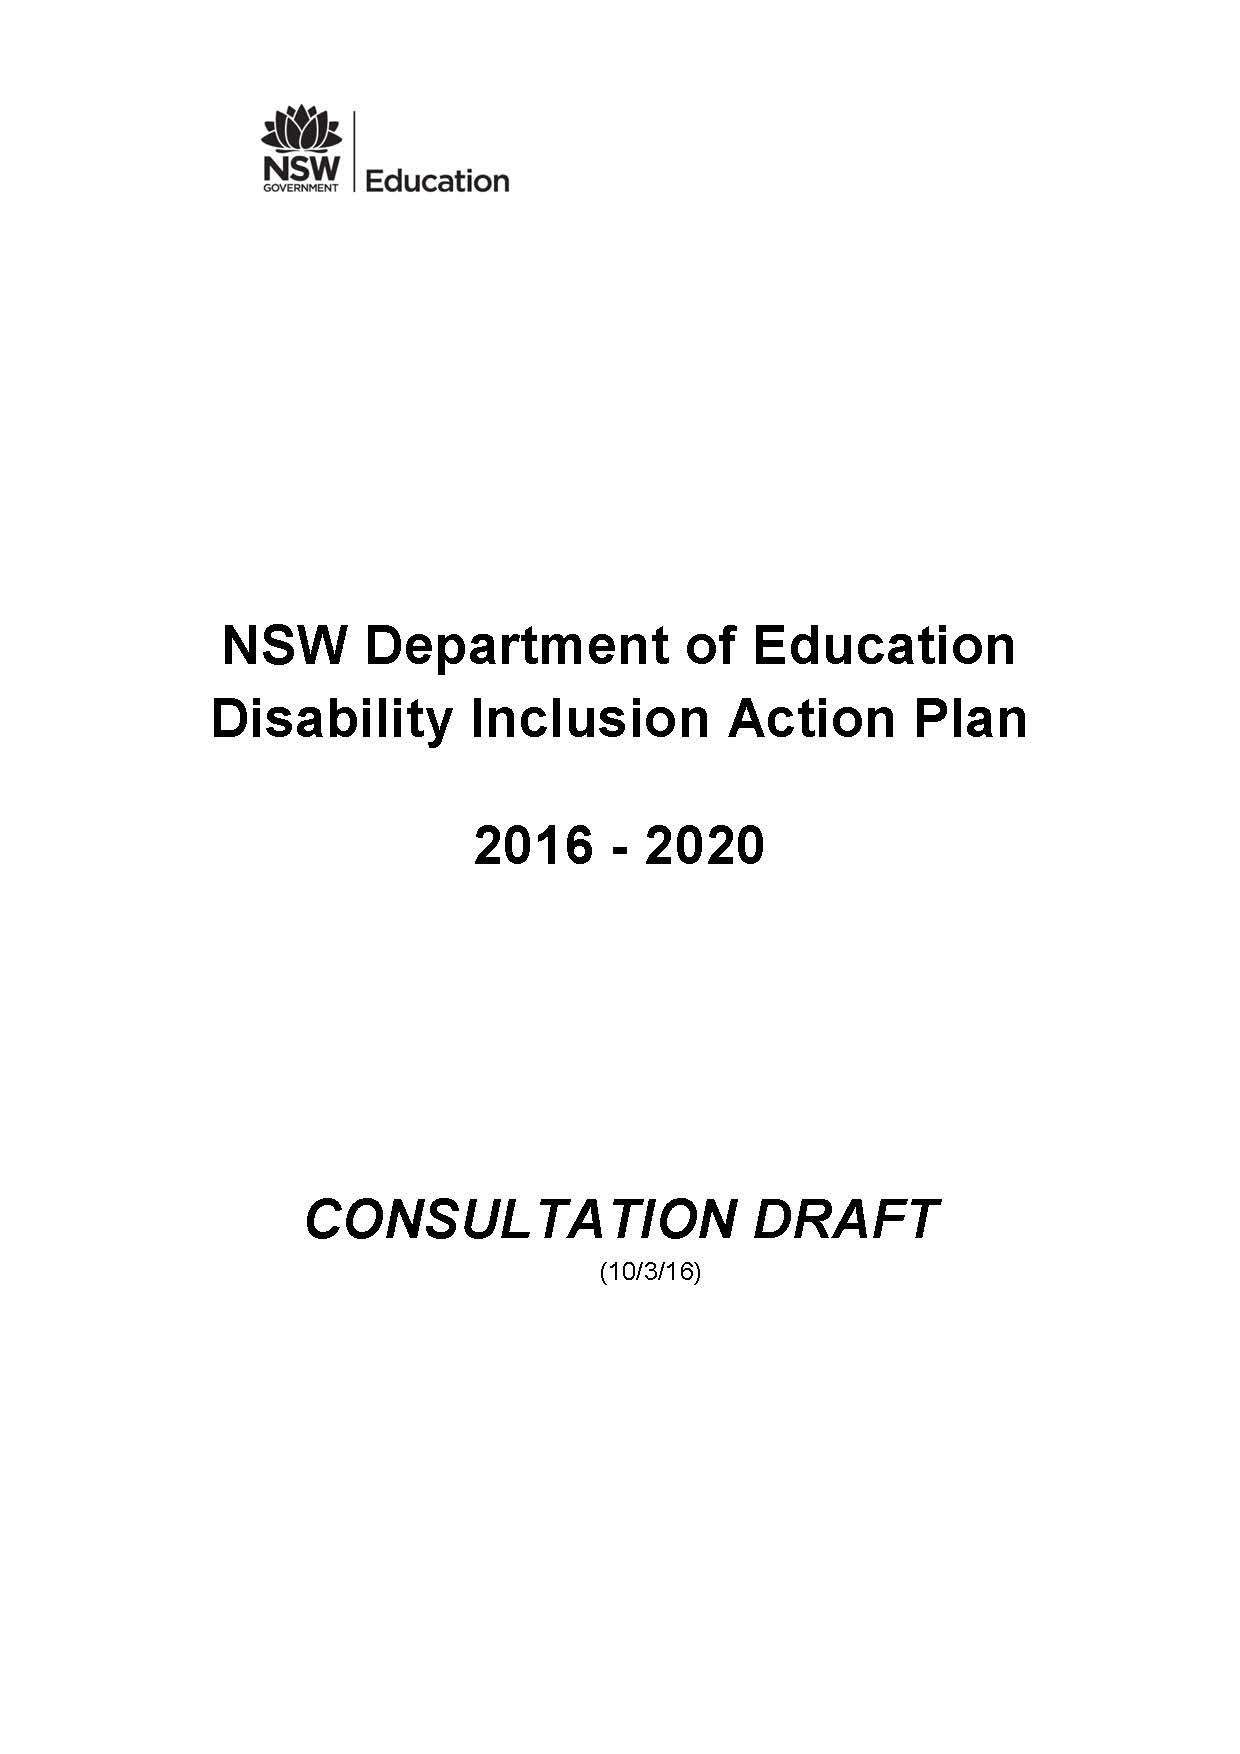 NSW Department of Education Disability Inclusion Action Plan 2016 - 2020